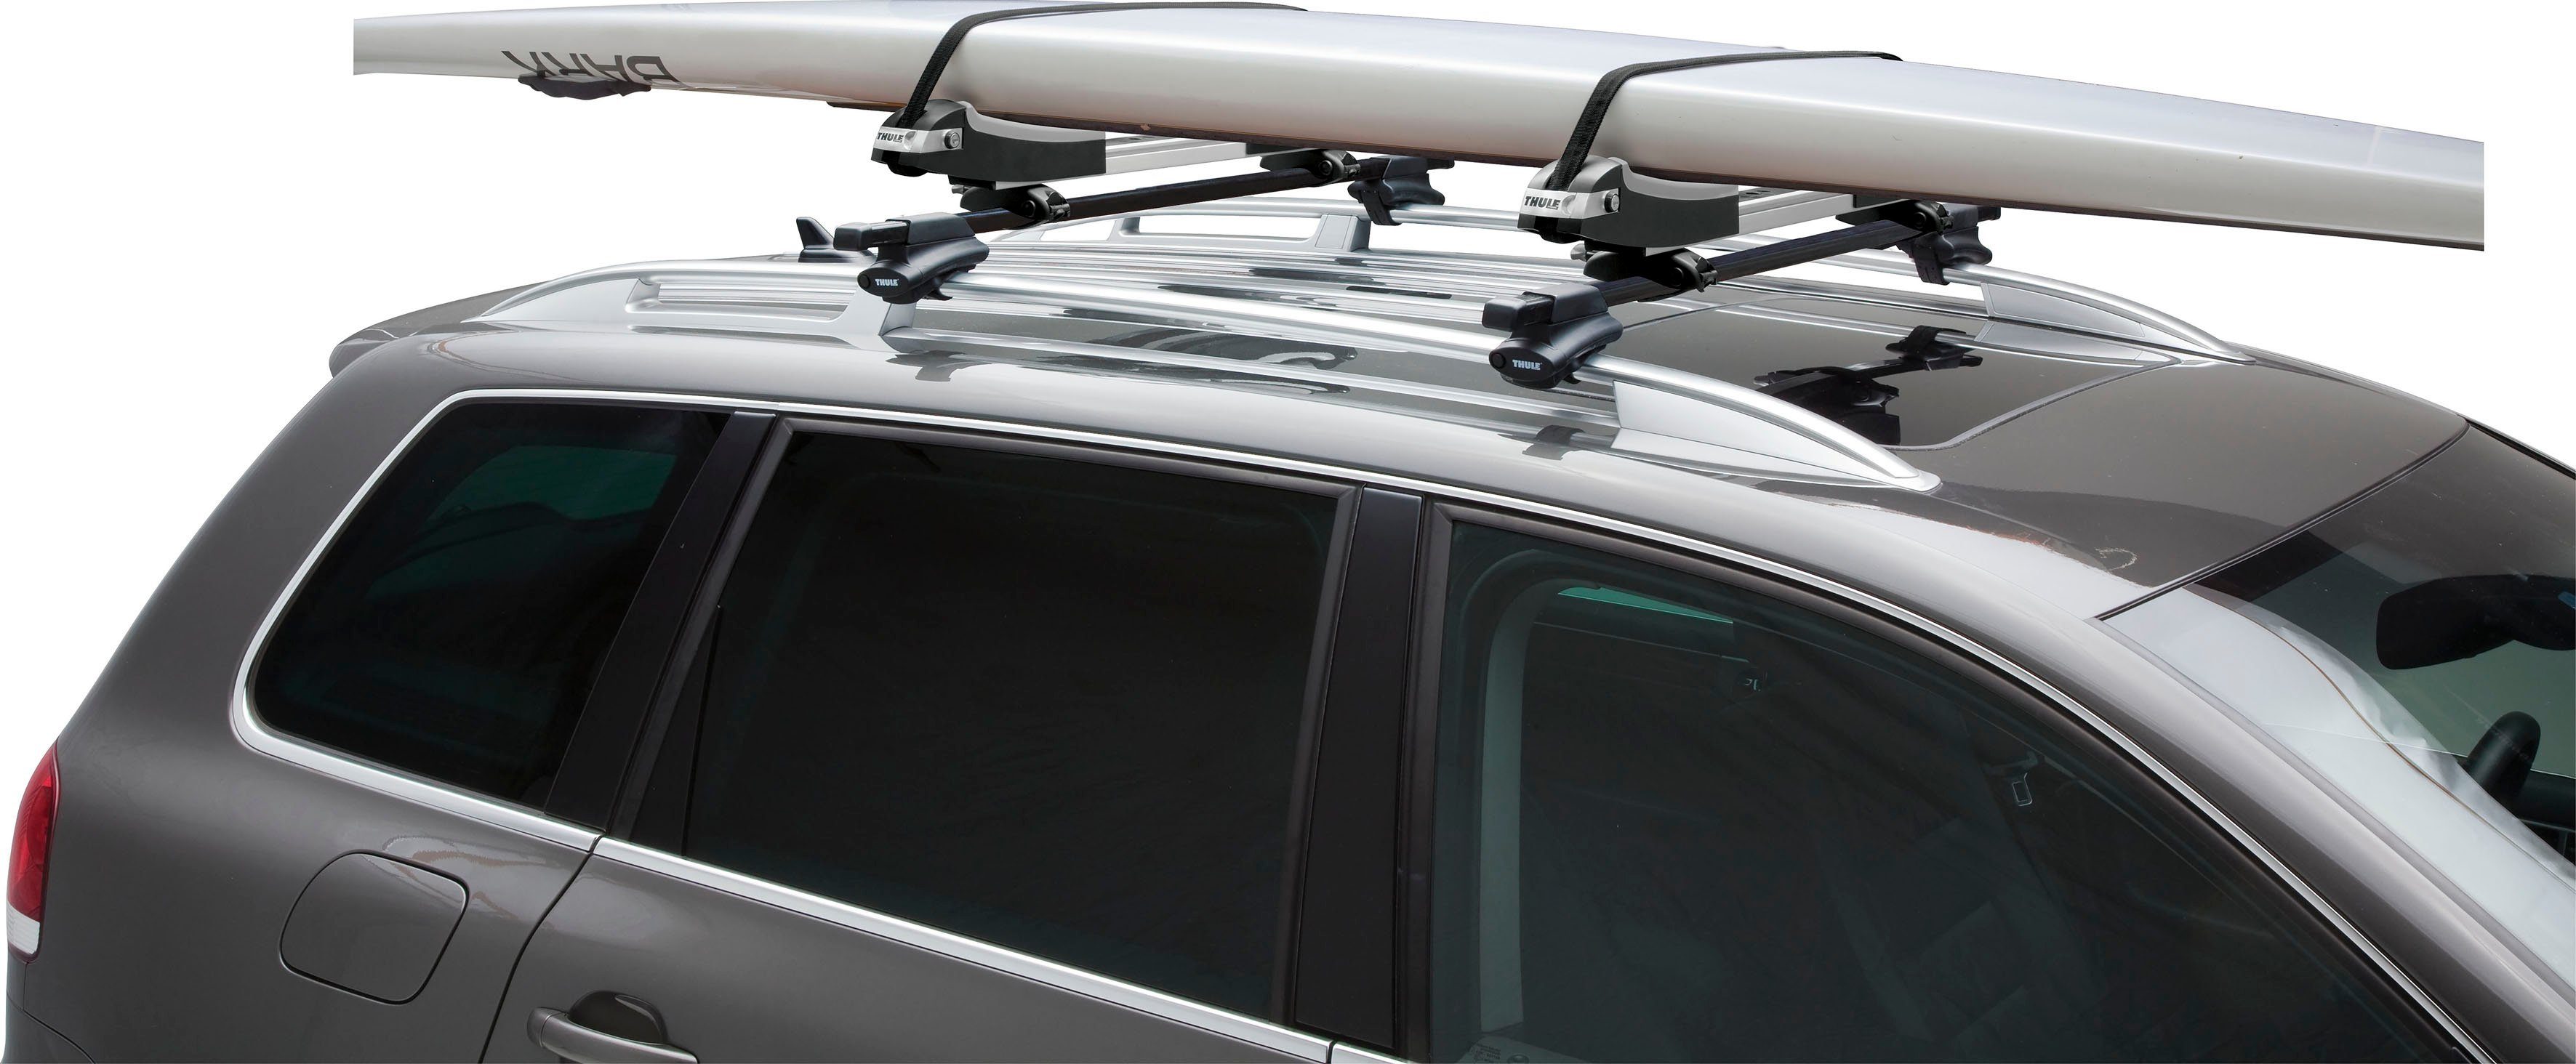 Dachträger SUP Thule XT, Taxi SUP-Boards für